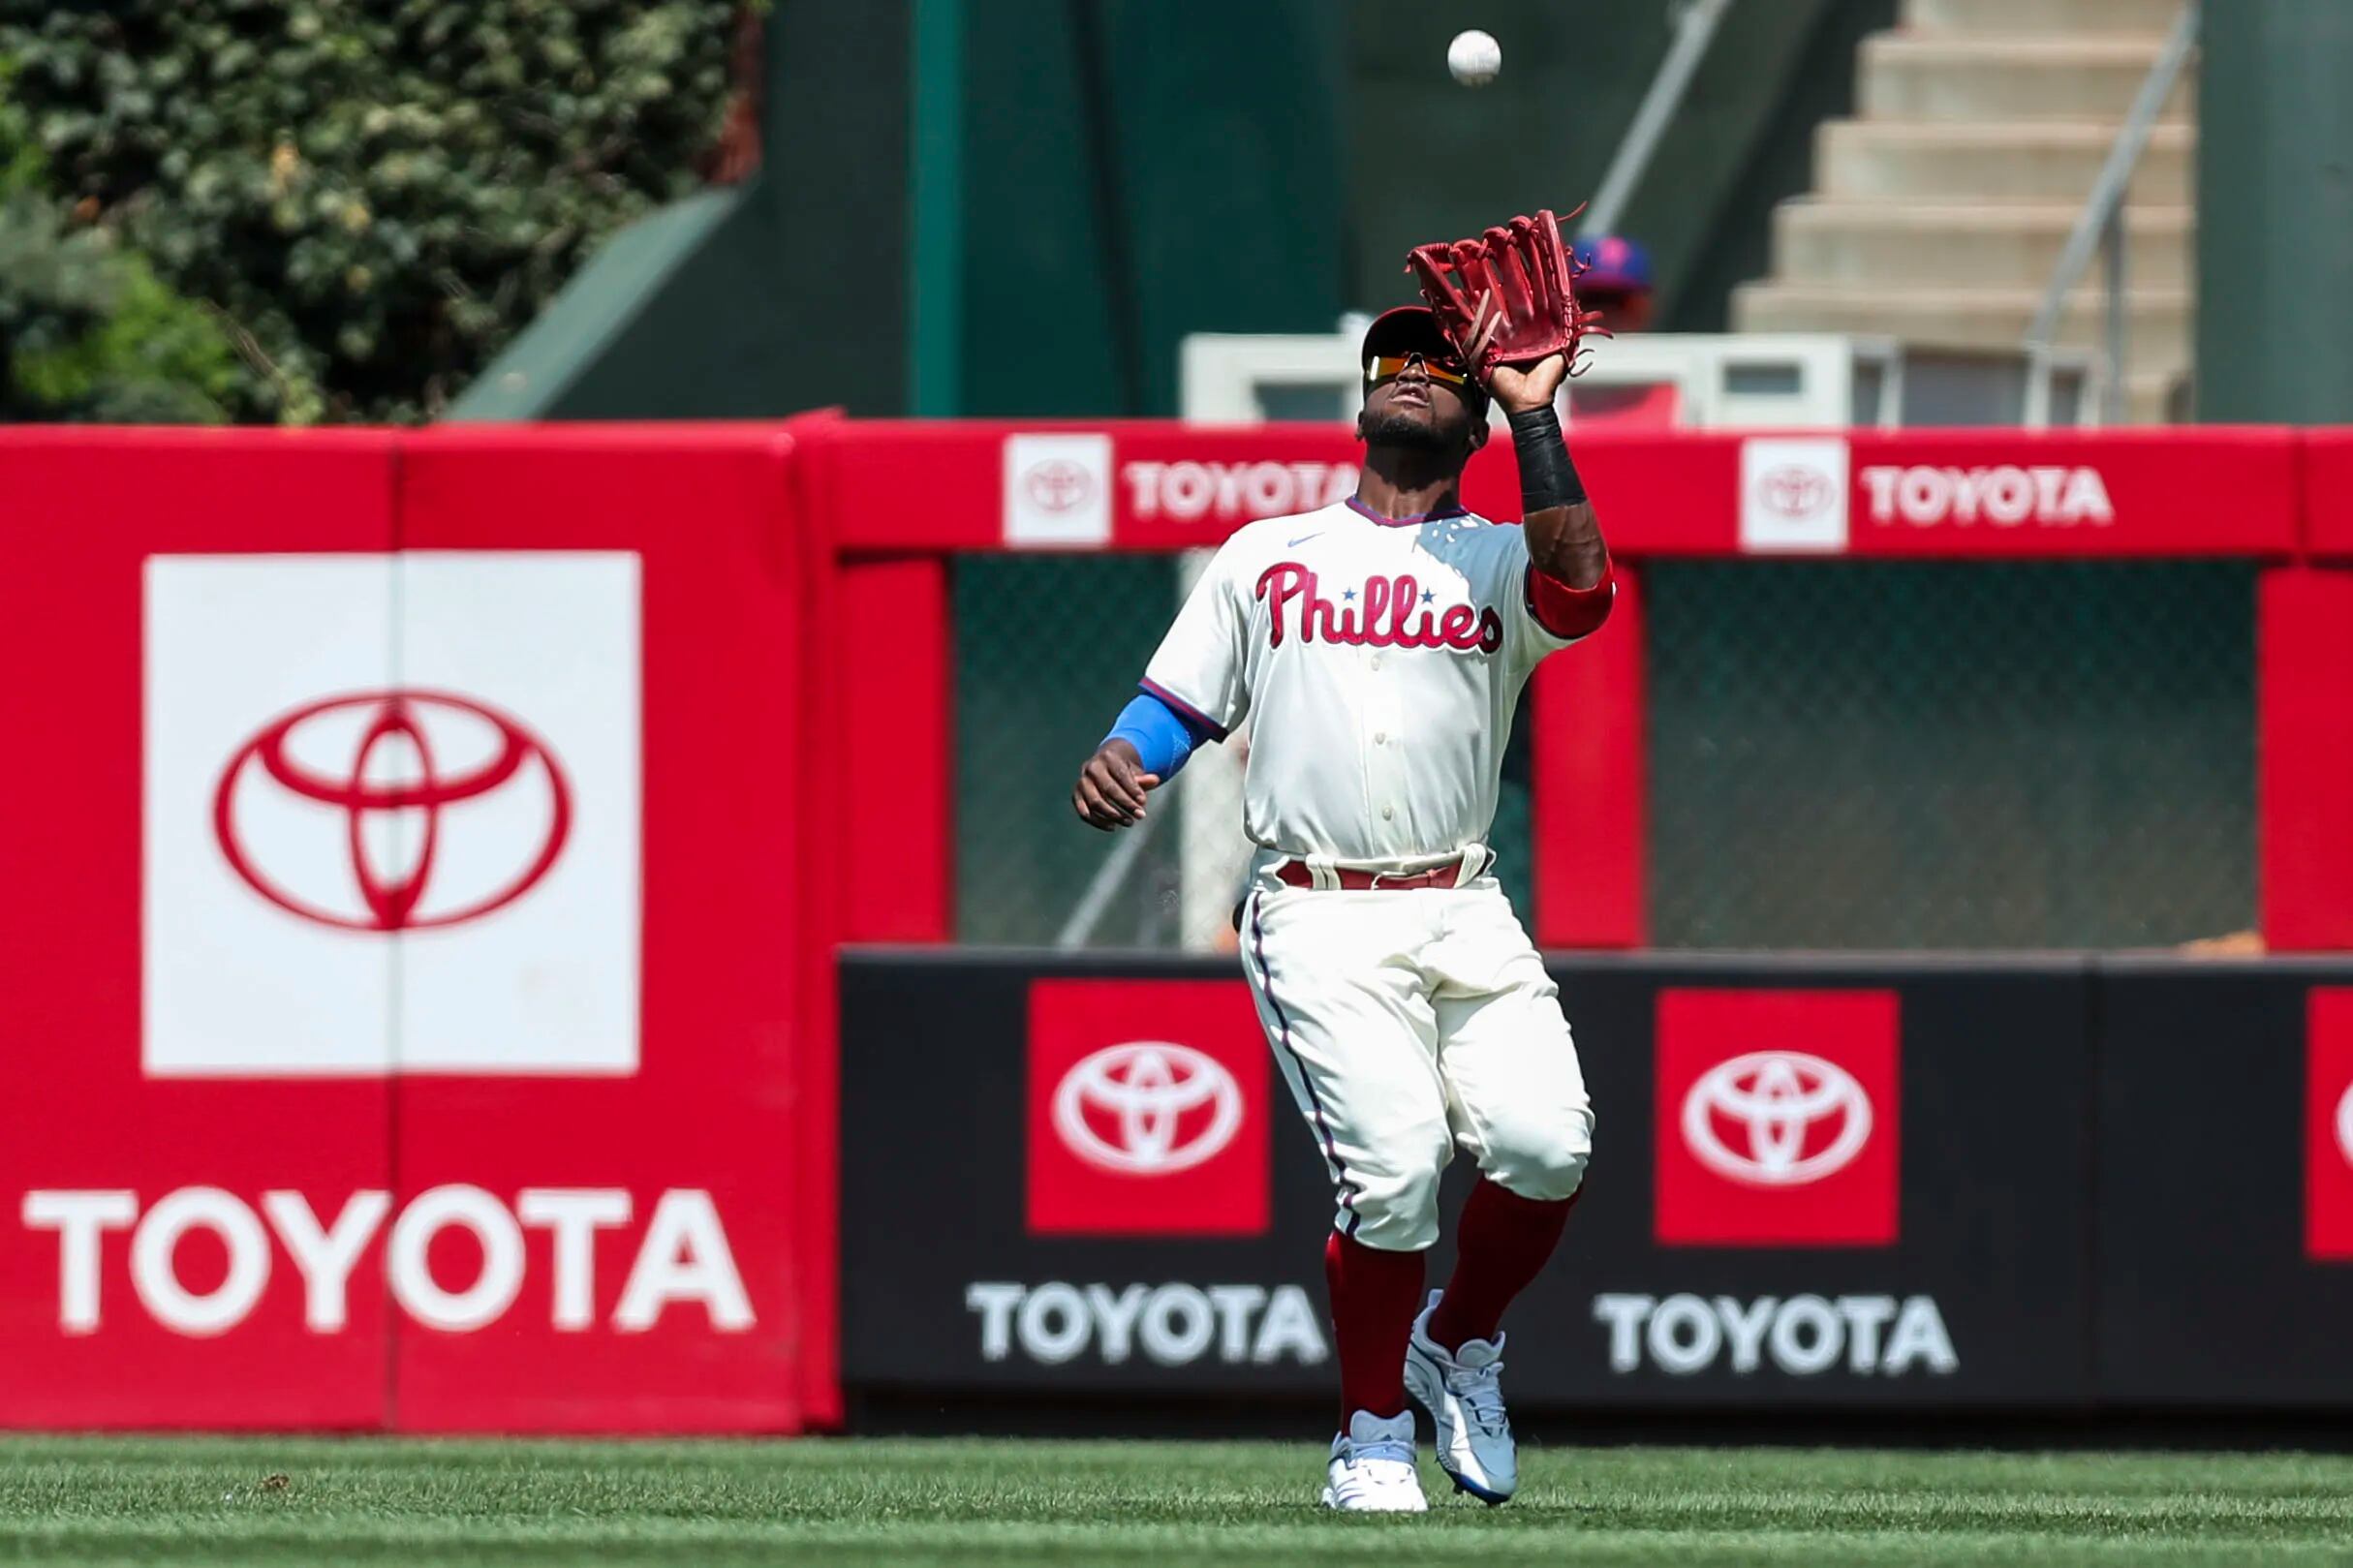 Phillies had a late come back and won🥳❤️ #fightinphillies #philliesba, phillies